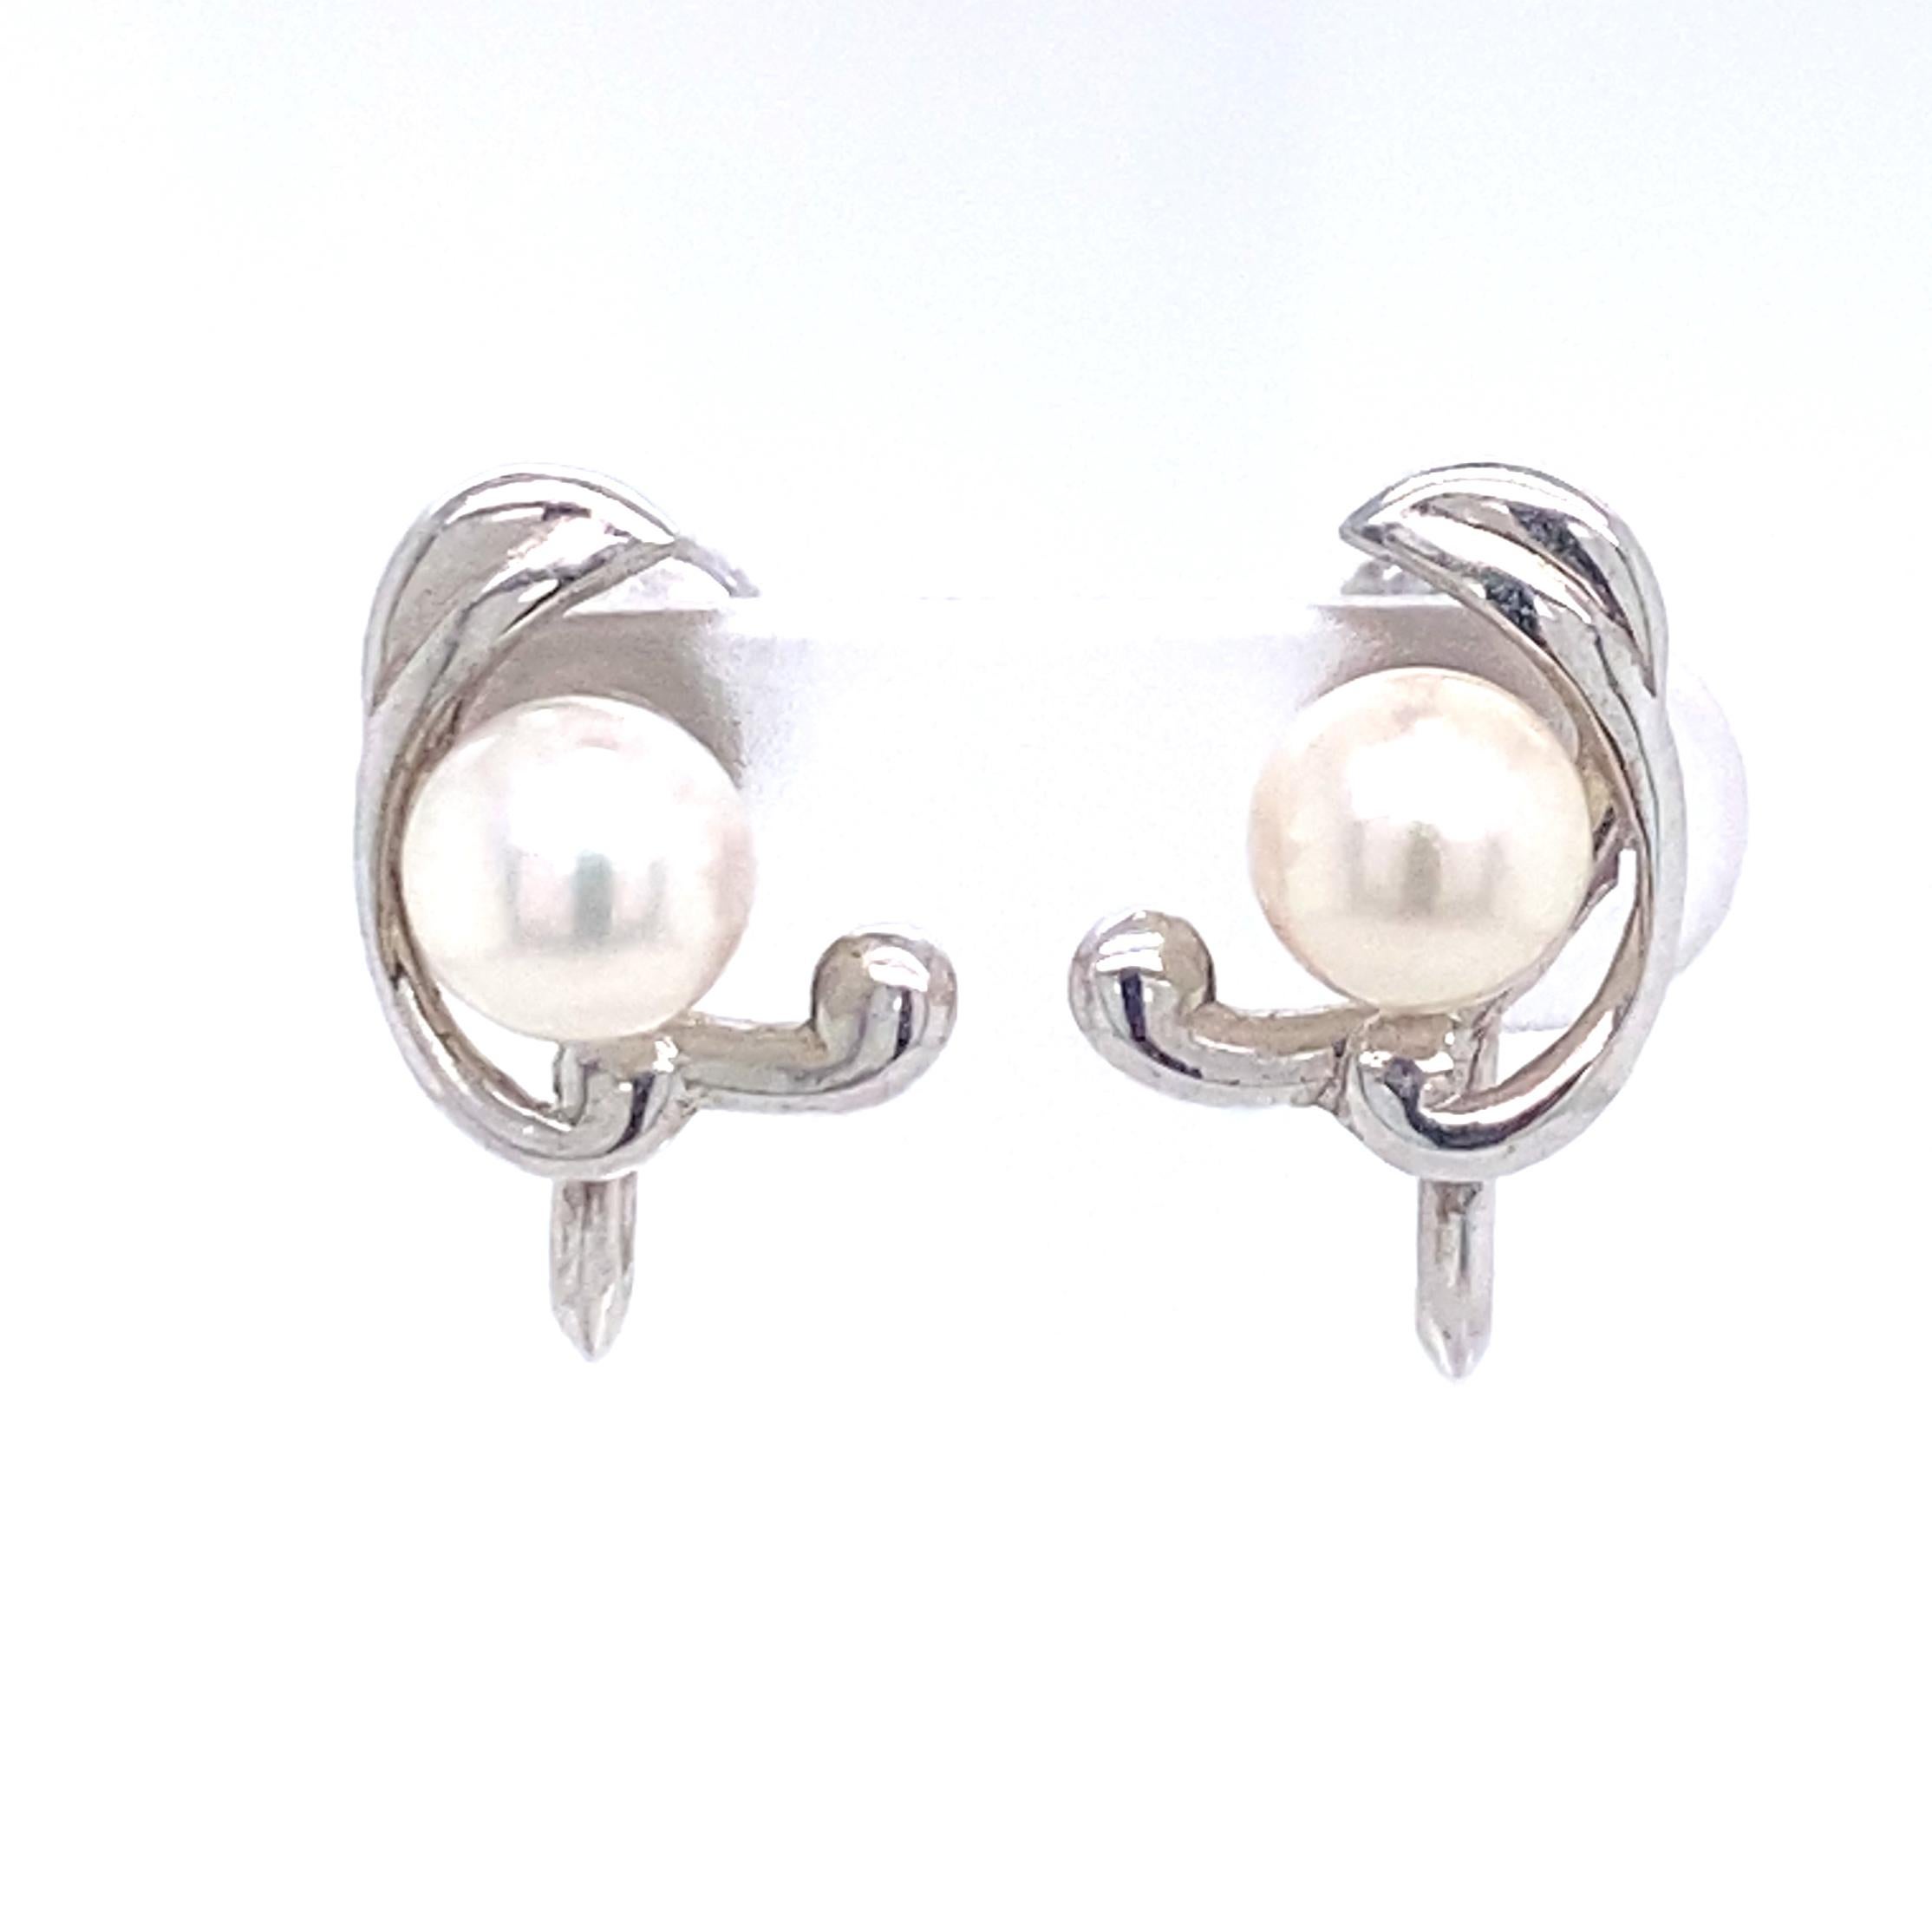 Mikimoto Estate Akoya Pearl Clip on Earrings Sterling Silver 3.53 Grams For Sale 7